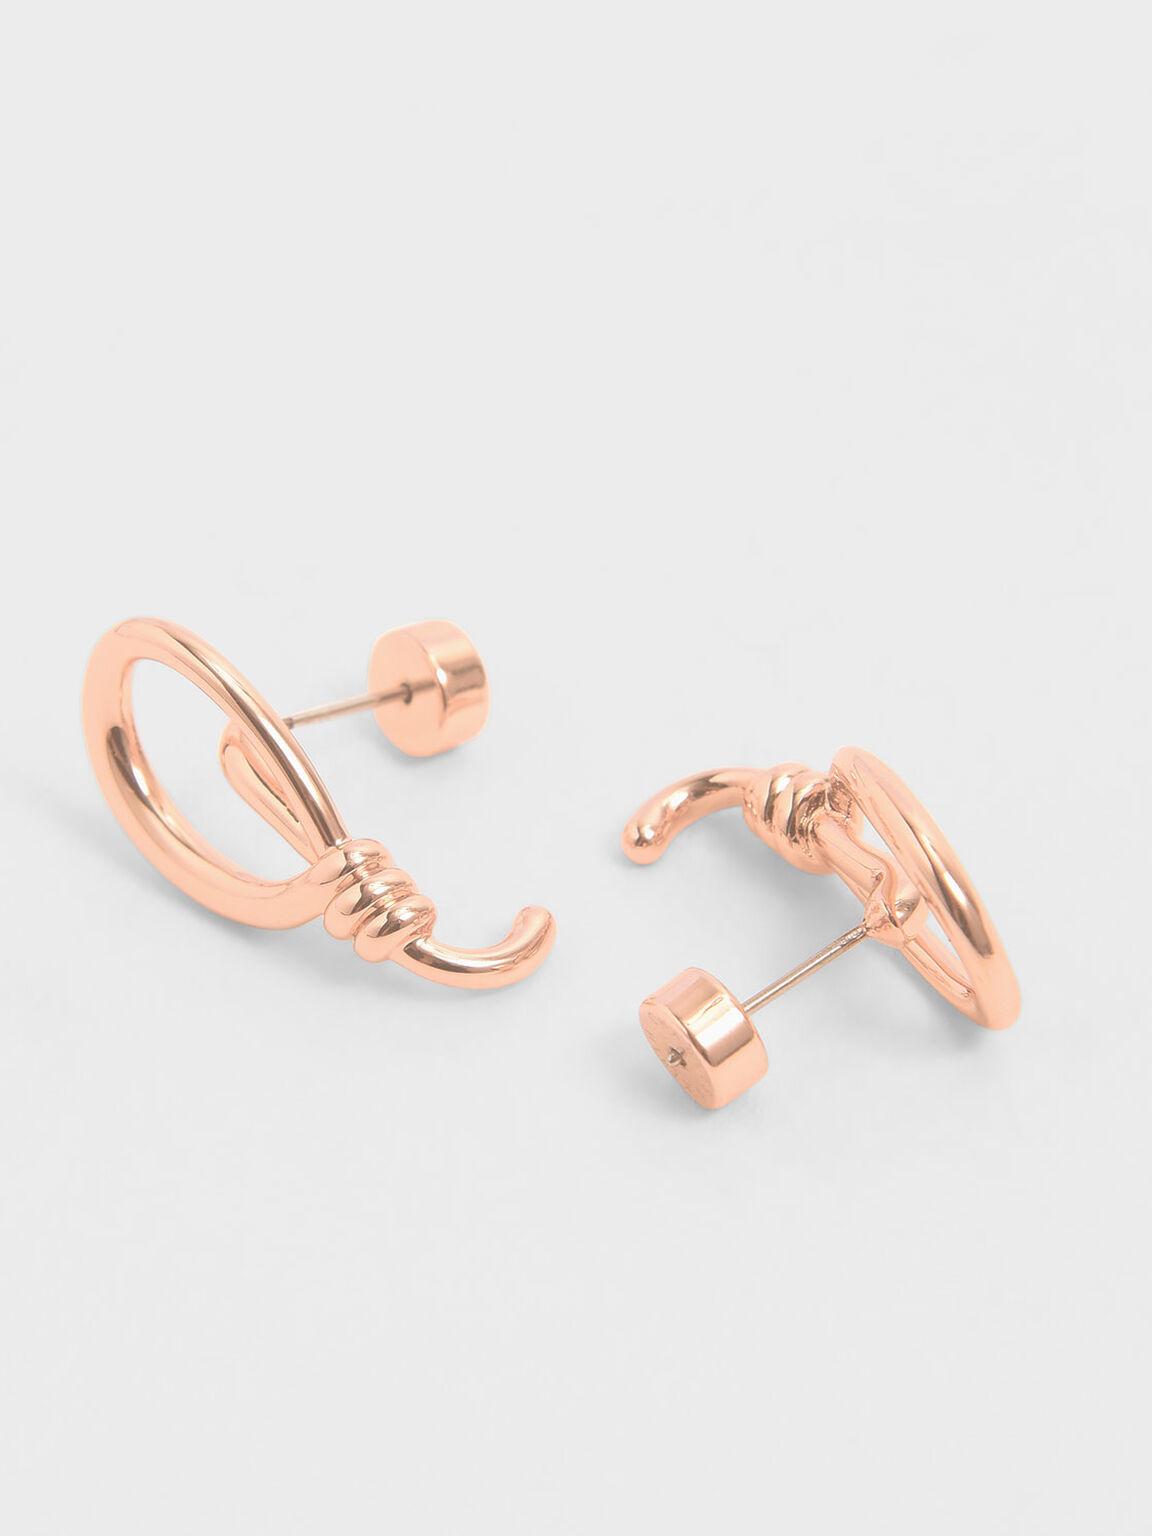 Knotted Stud Earrings, Rose Gold, hi-res